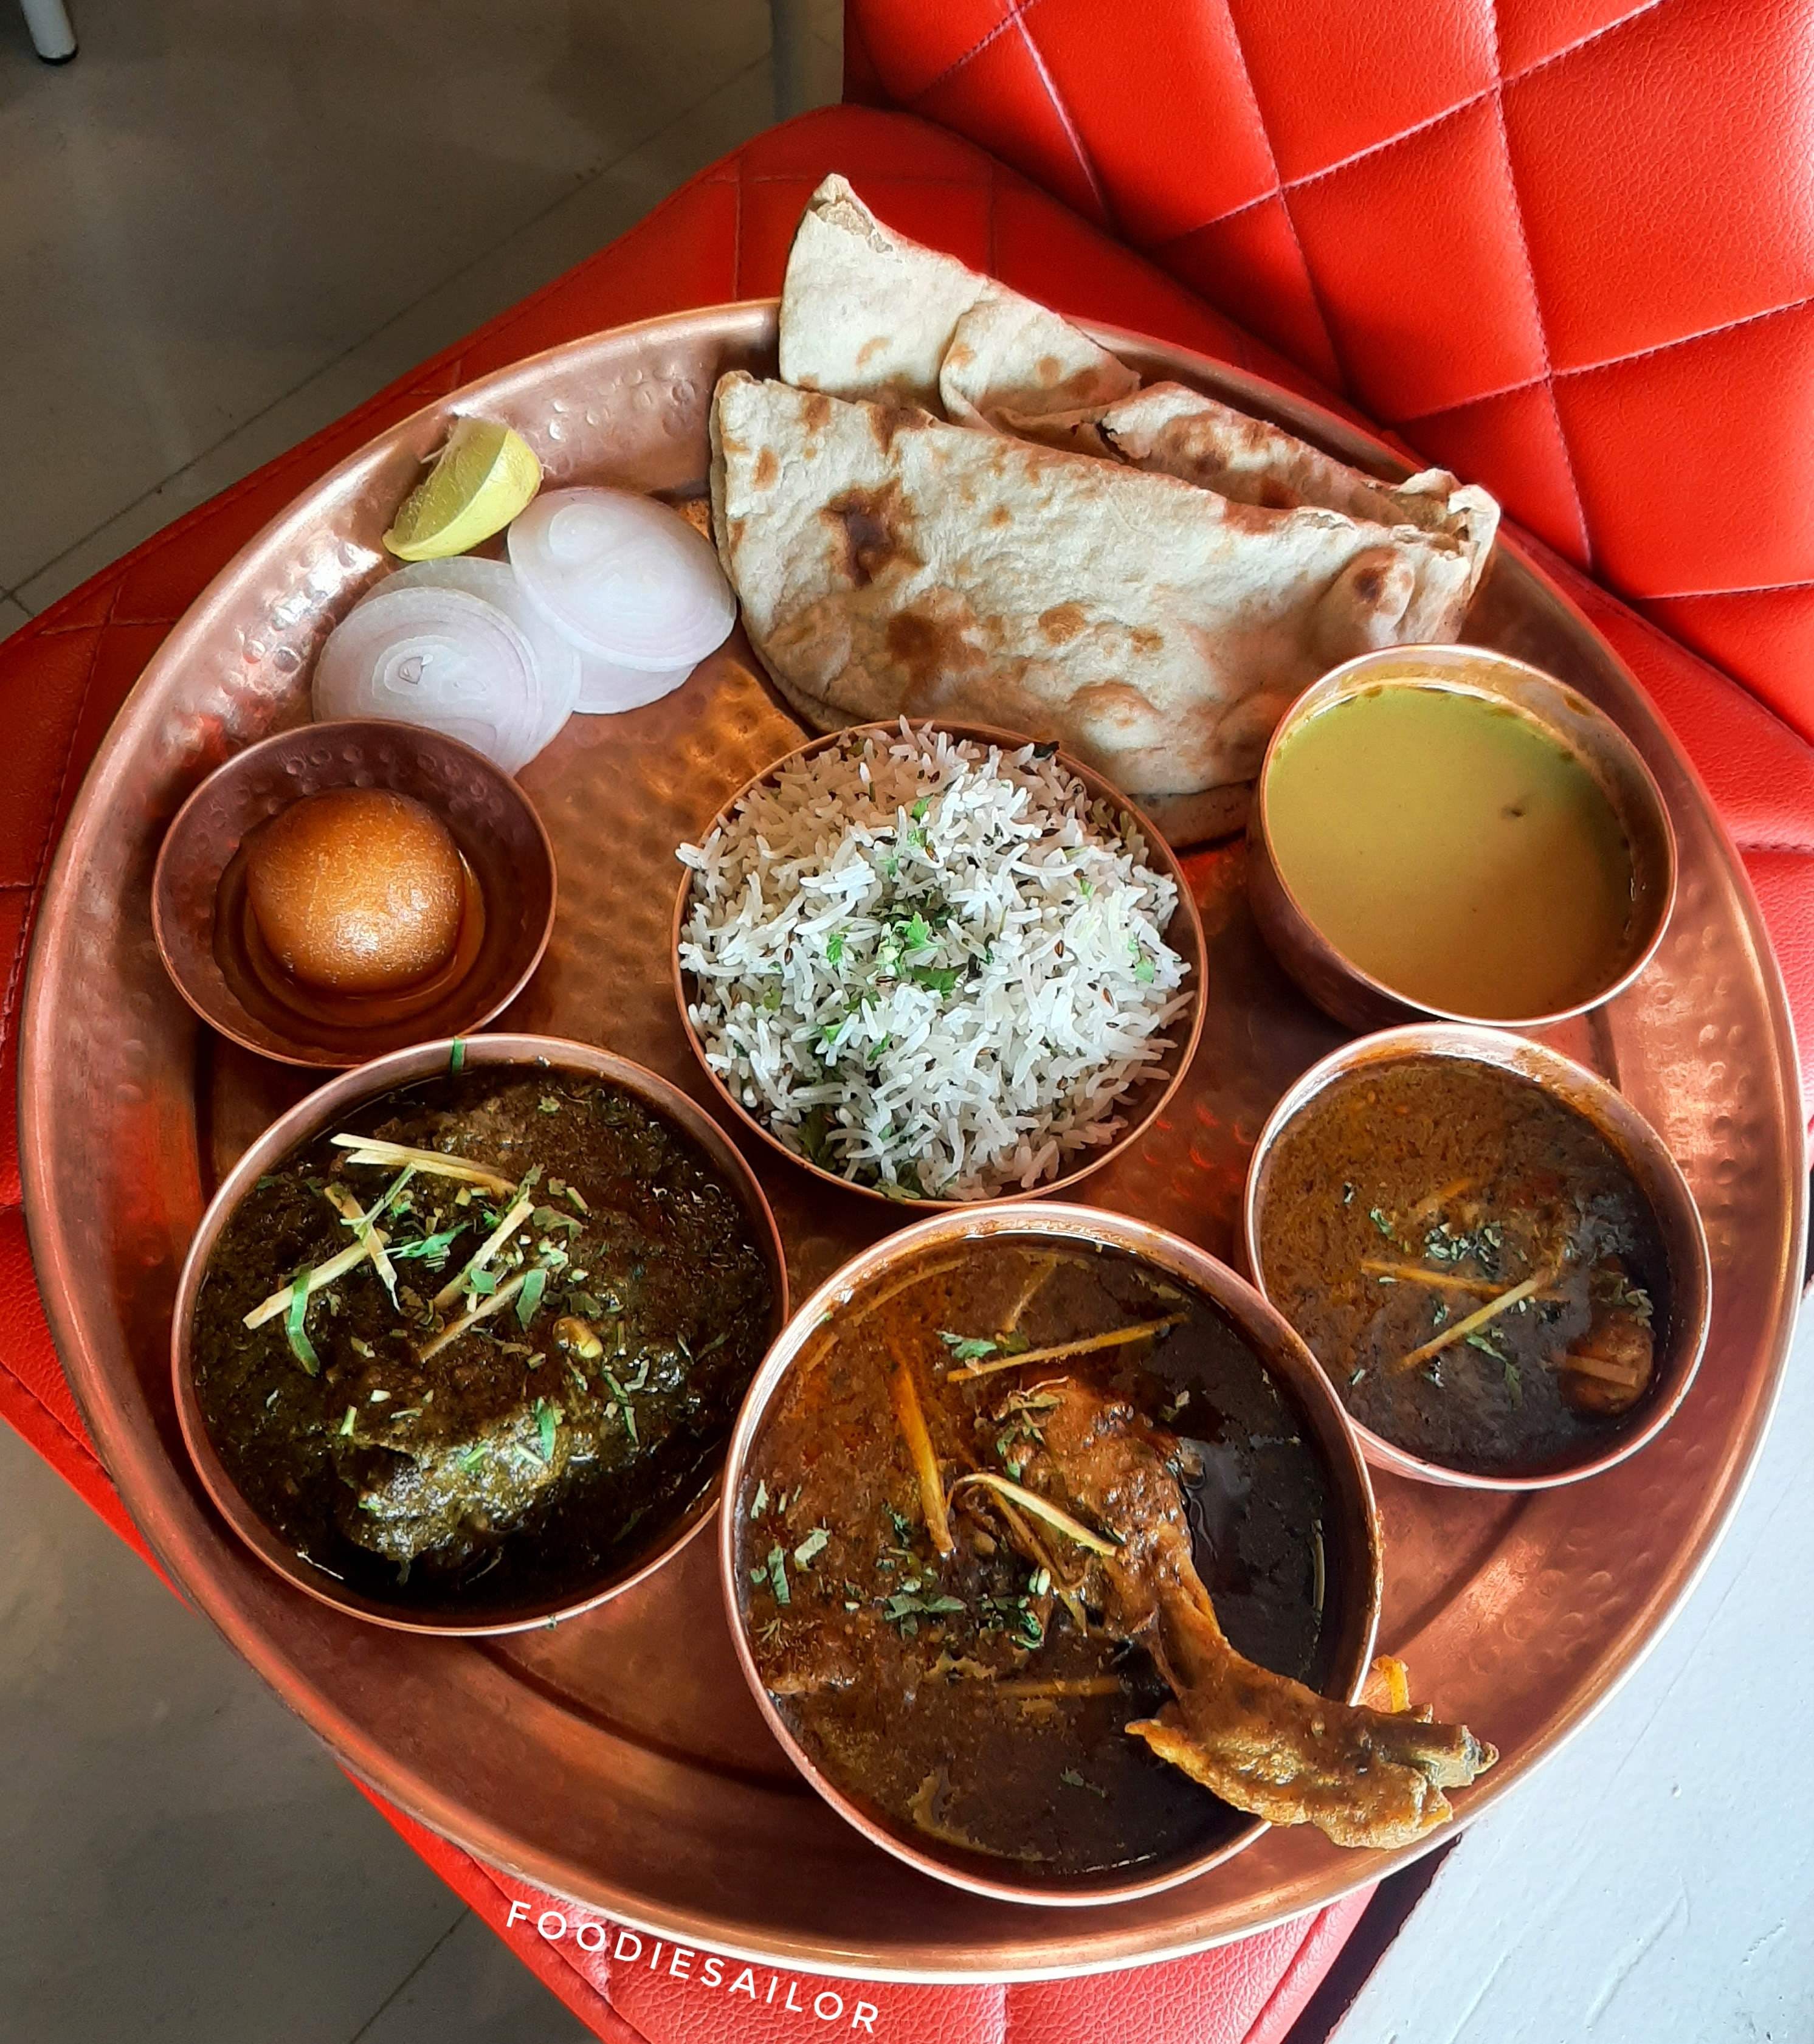 Enjoy The Perfectly Authentic Rajasthani Thali At This Outlet!